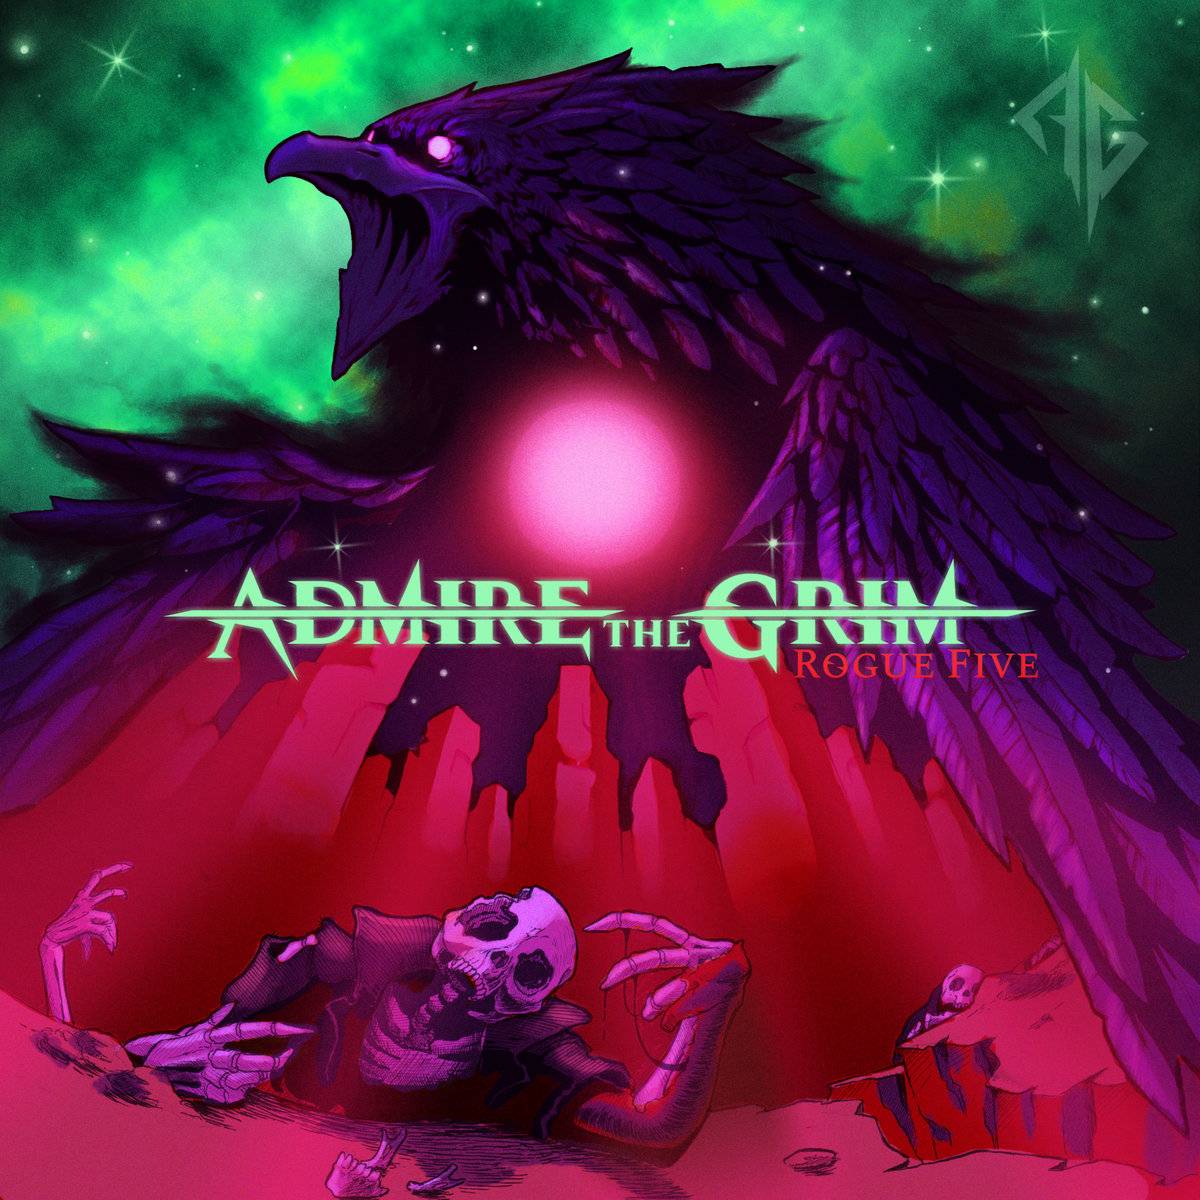 Admire The Grim :"Rogue Five" CD 13th January 2023 Inverse Records.